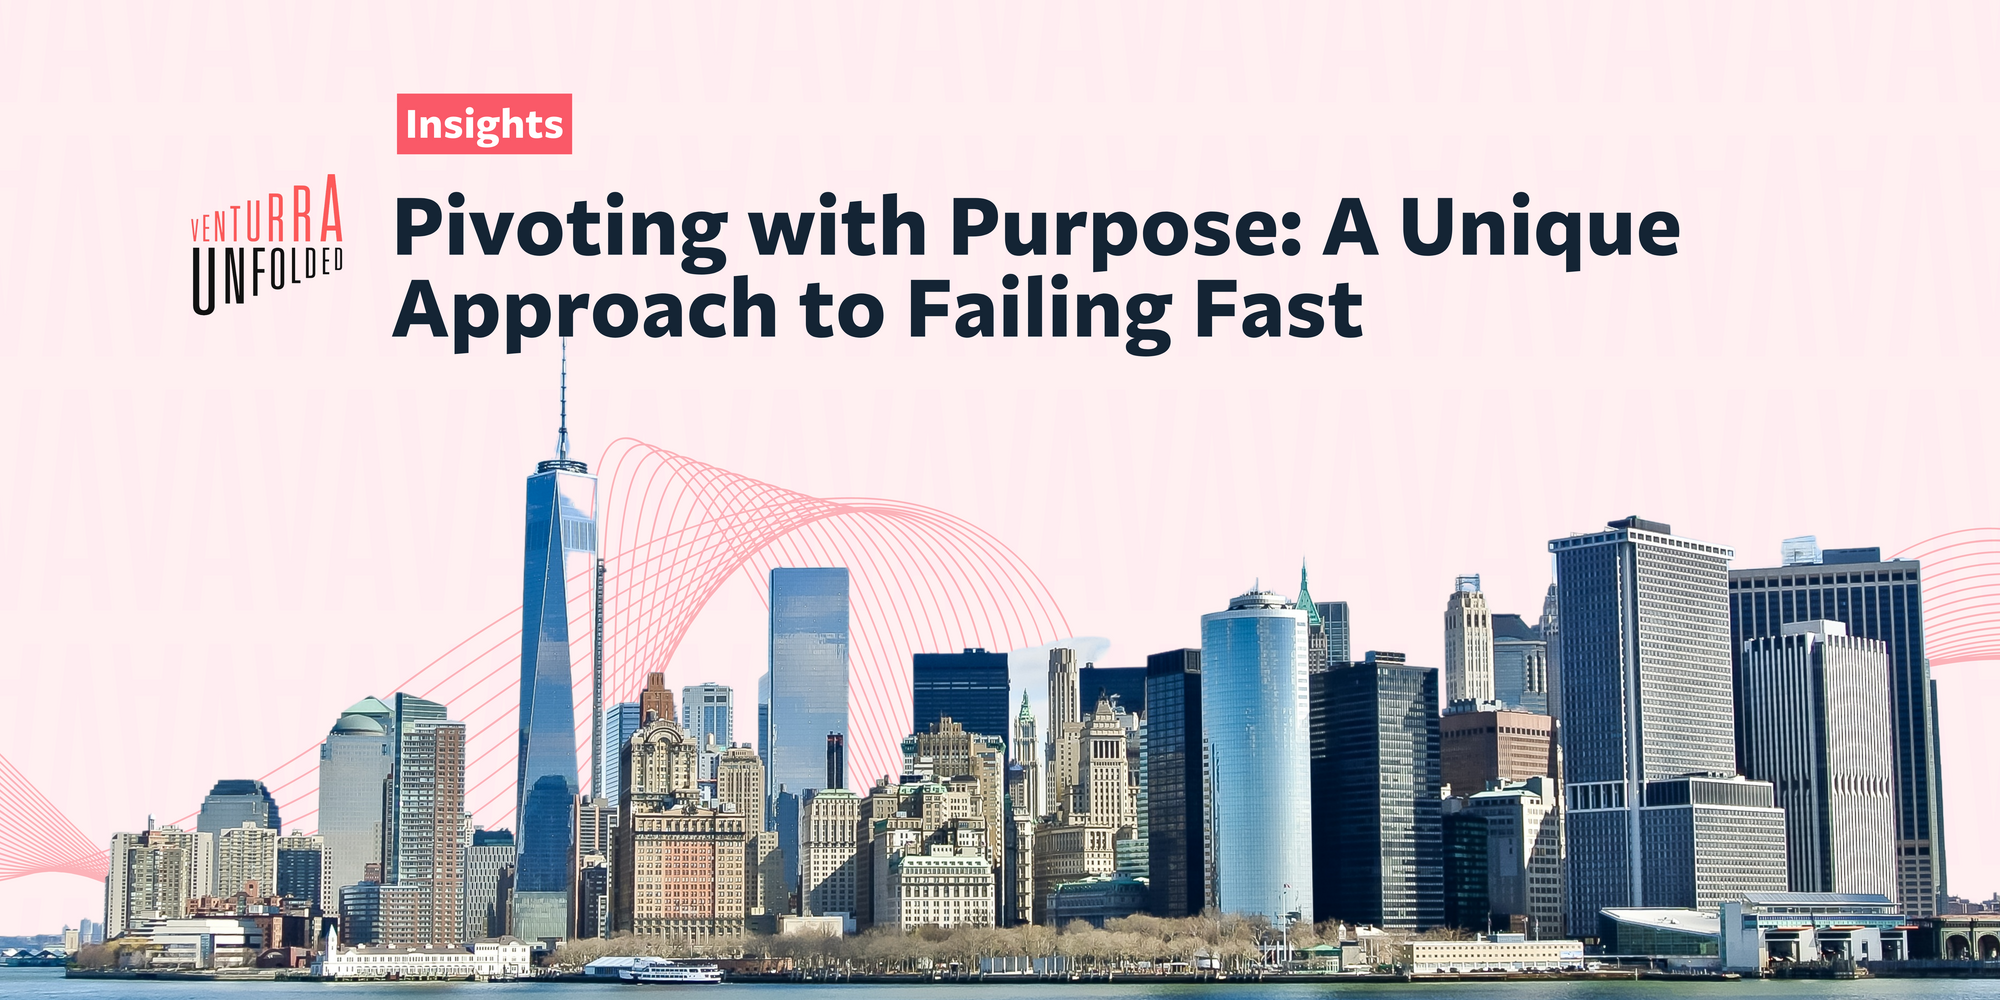 Pivoting with Purpose: A Unique Approach to Failing Fast